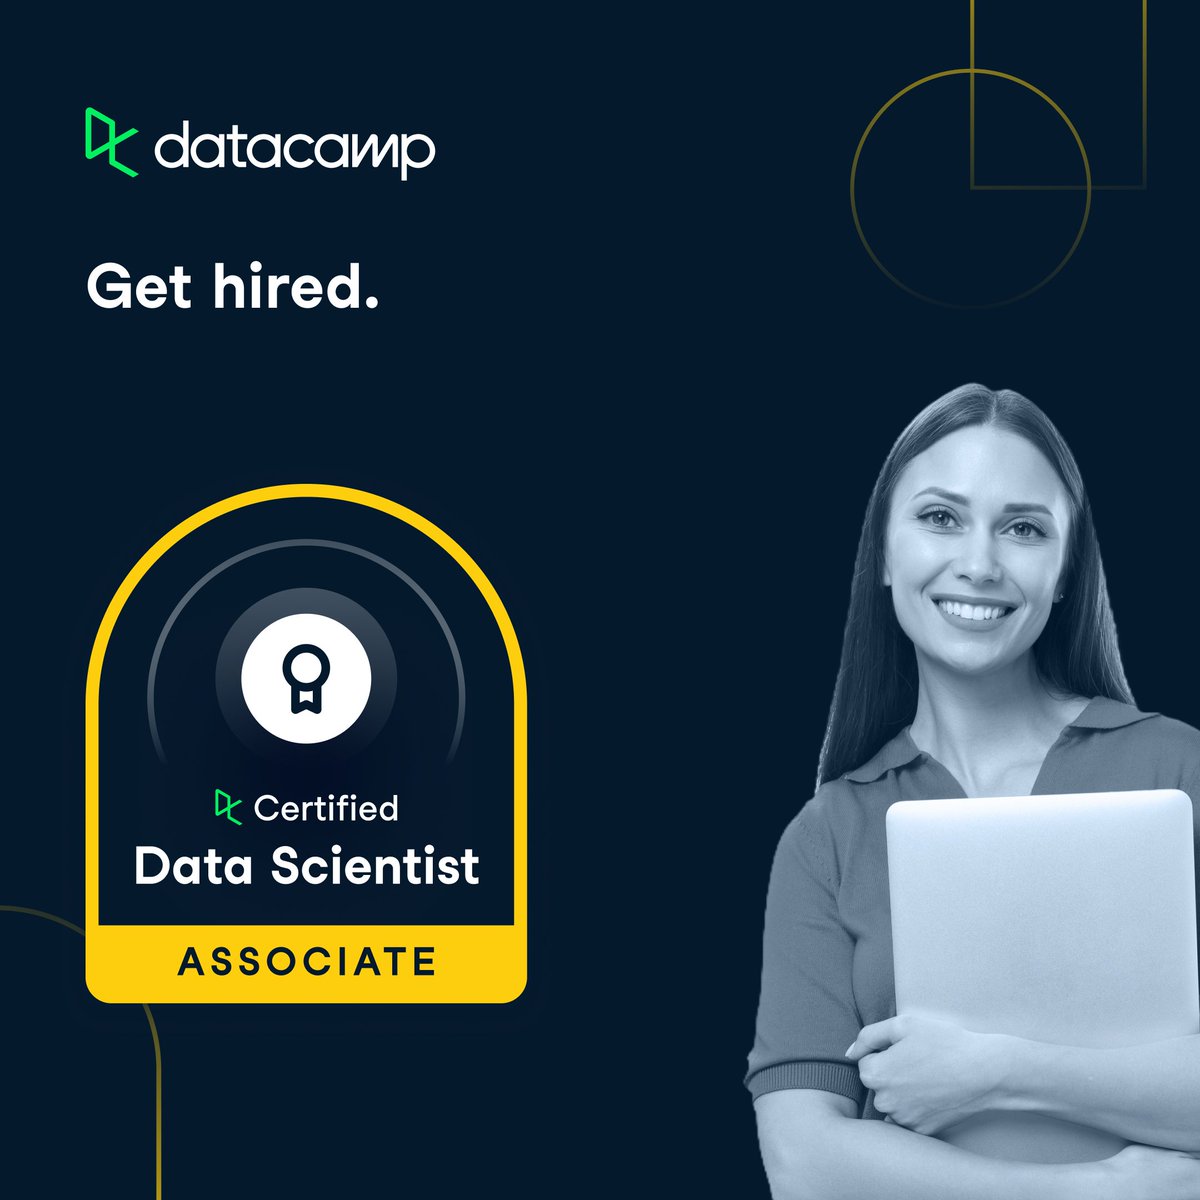 Build skills. Get hired. 💼

Stand out from the crowd by converting course completions into industry-leading Certifications.

Including in-demand roles employers are hiring for:

📊 Data Analyst
🧪 Data Scientist
🛠 Data Engineer

Certification Hub 👉  ow.ly/pmB650ROQ3p